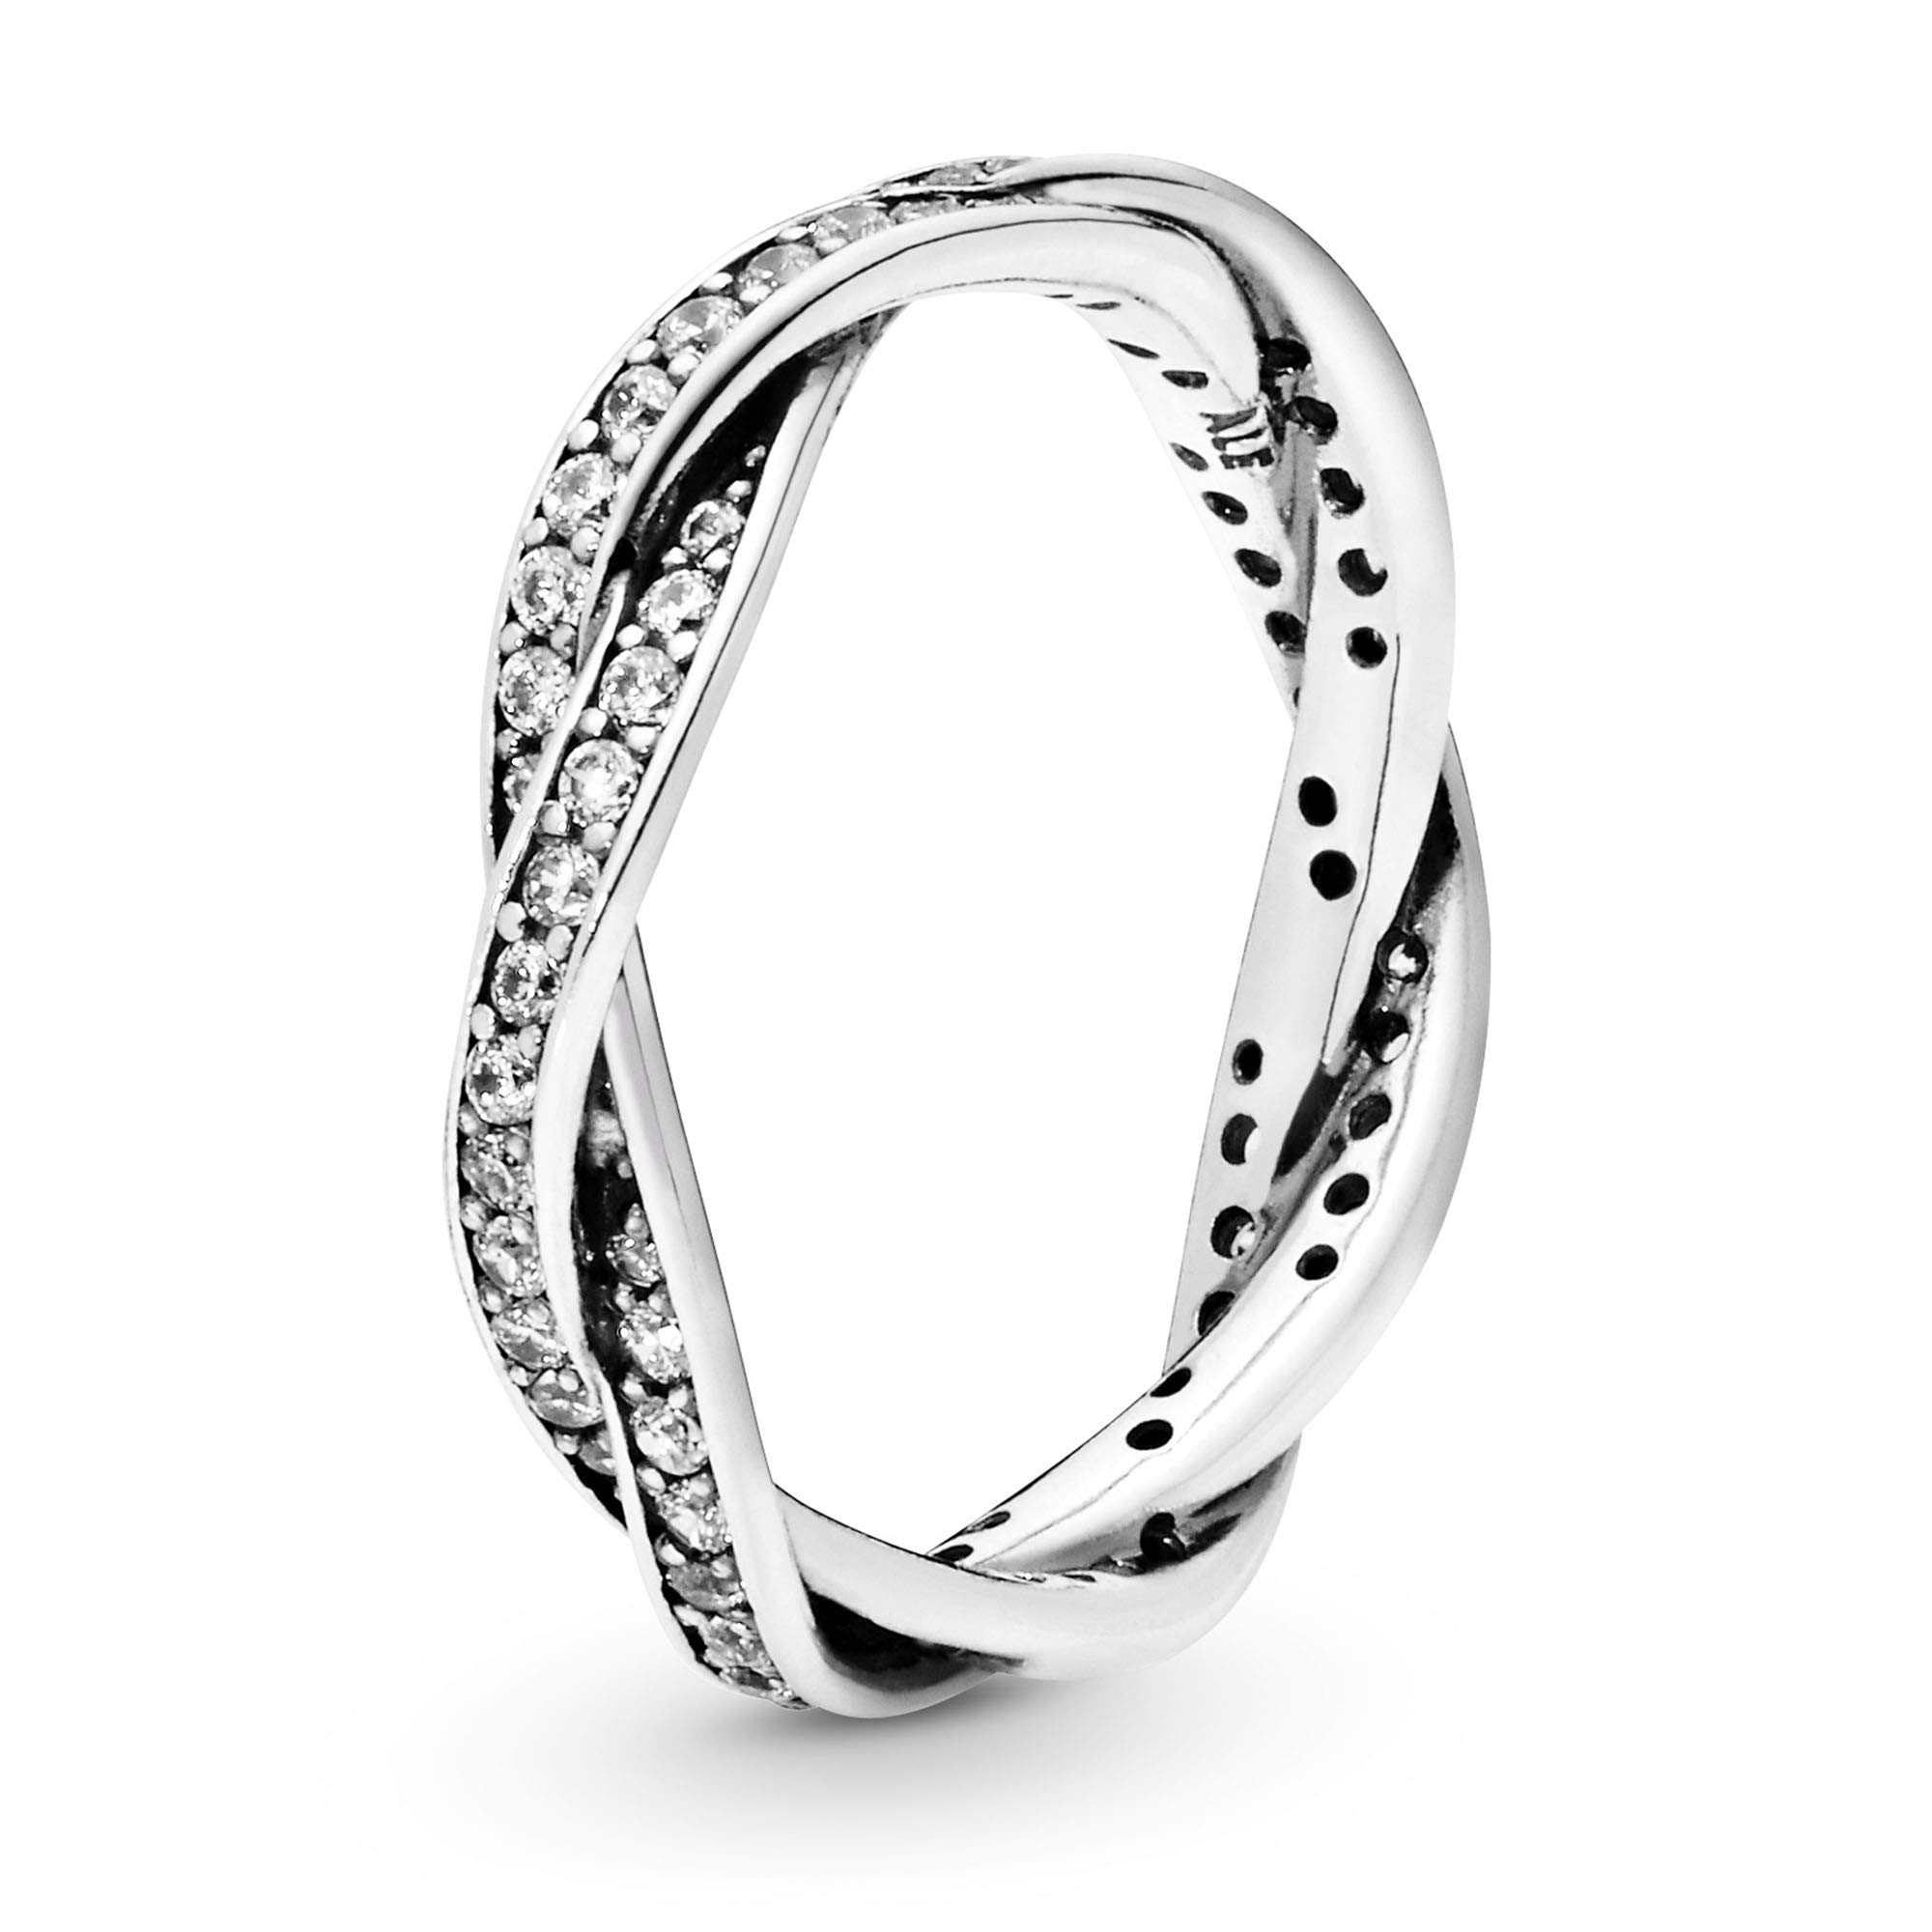 PANDORA Jewelry Twist of Fate Cubic Zirconia Ring in Sterling Silver